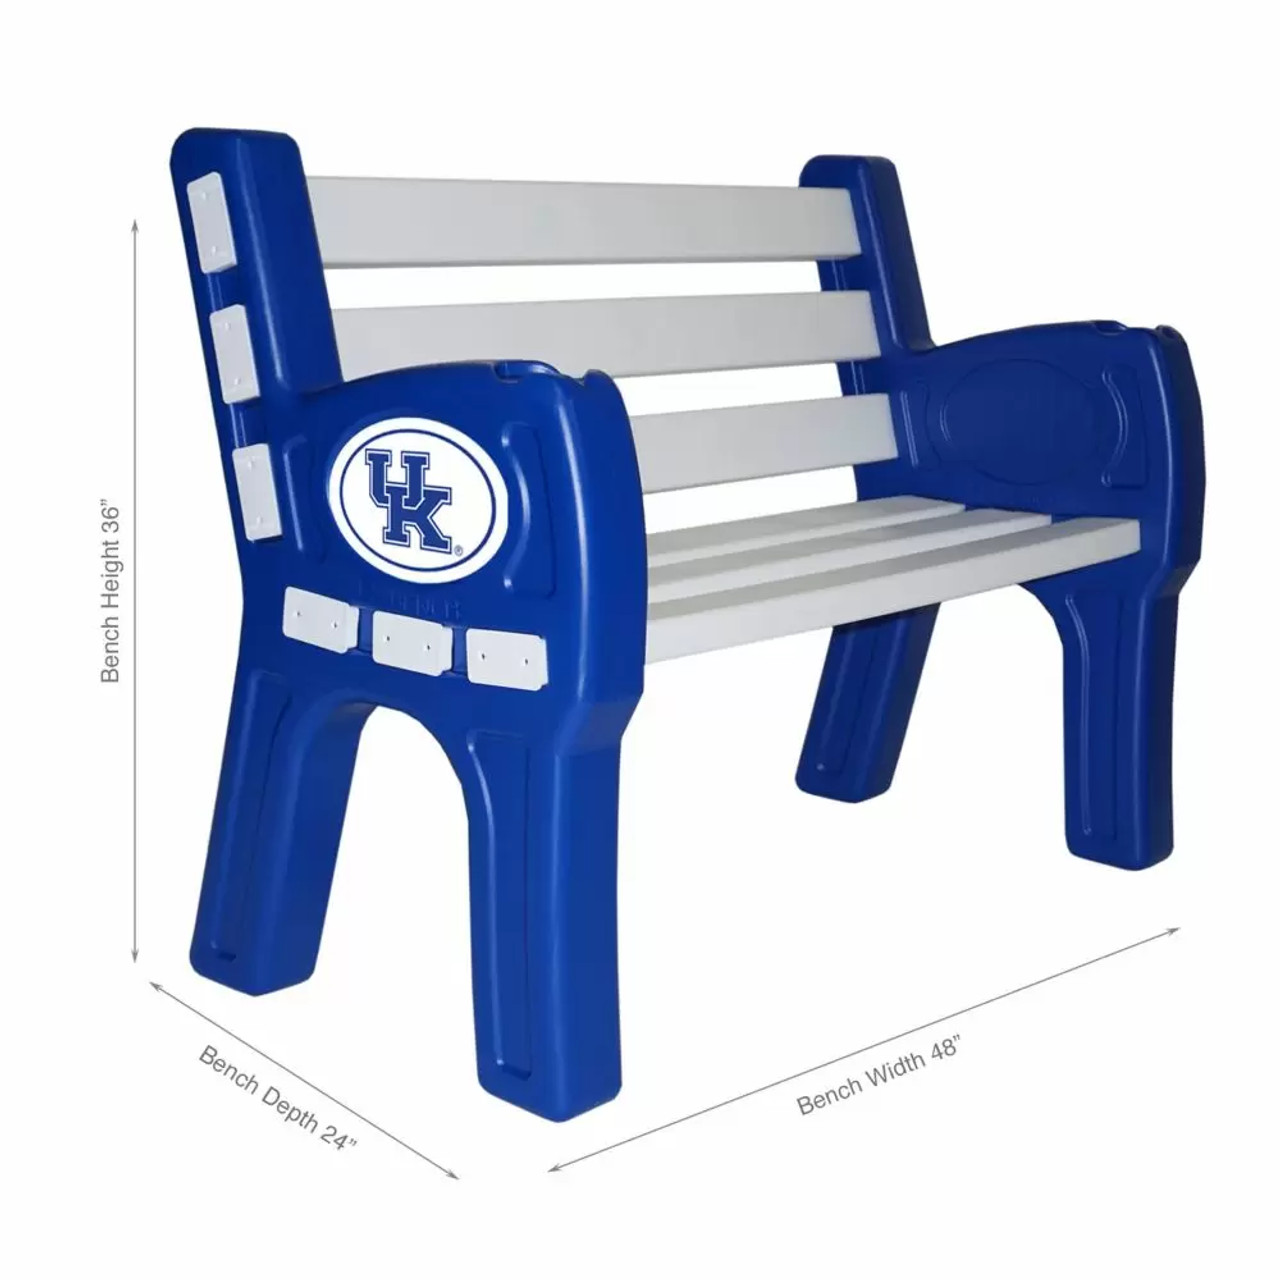 388-3032, Kentucky, KY, Wildcats, Cats, 4', 48" Park, Bench, FREE SHIPPING, NCAA, Imperial